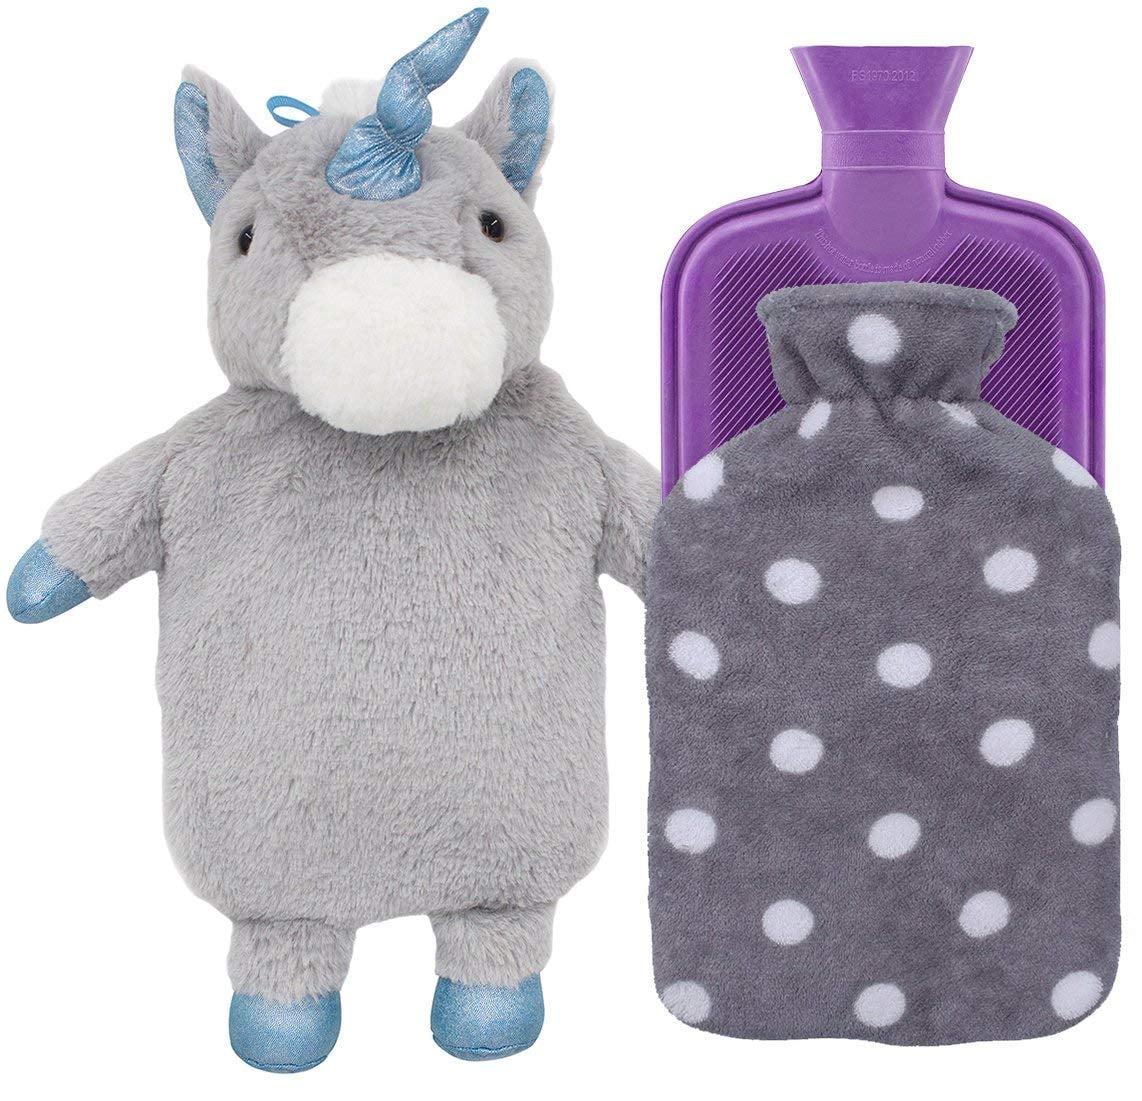 Why Hot Water Bottles Are The *Best* (Plus, 9 Cute Covers) - Chatelaine